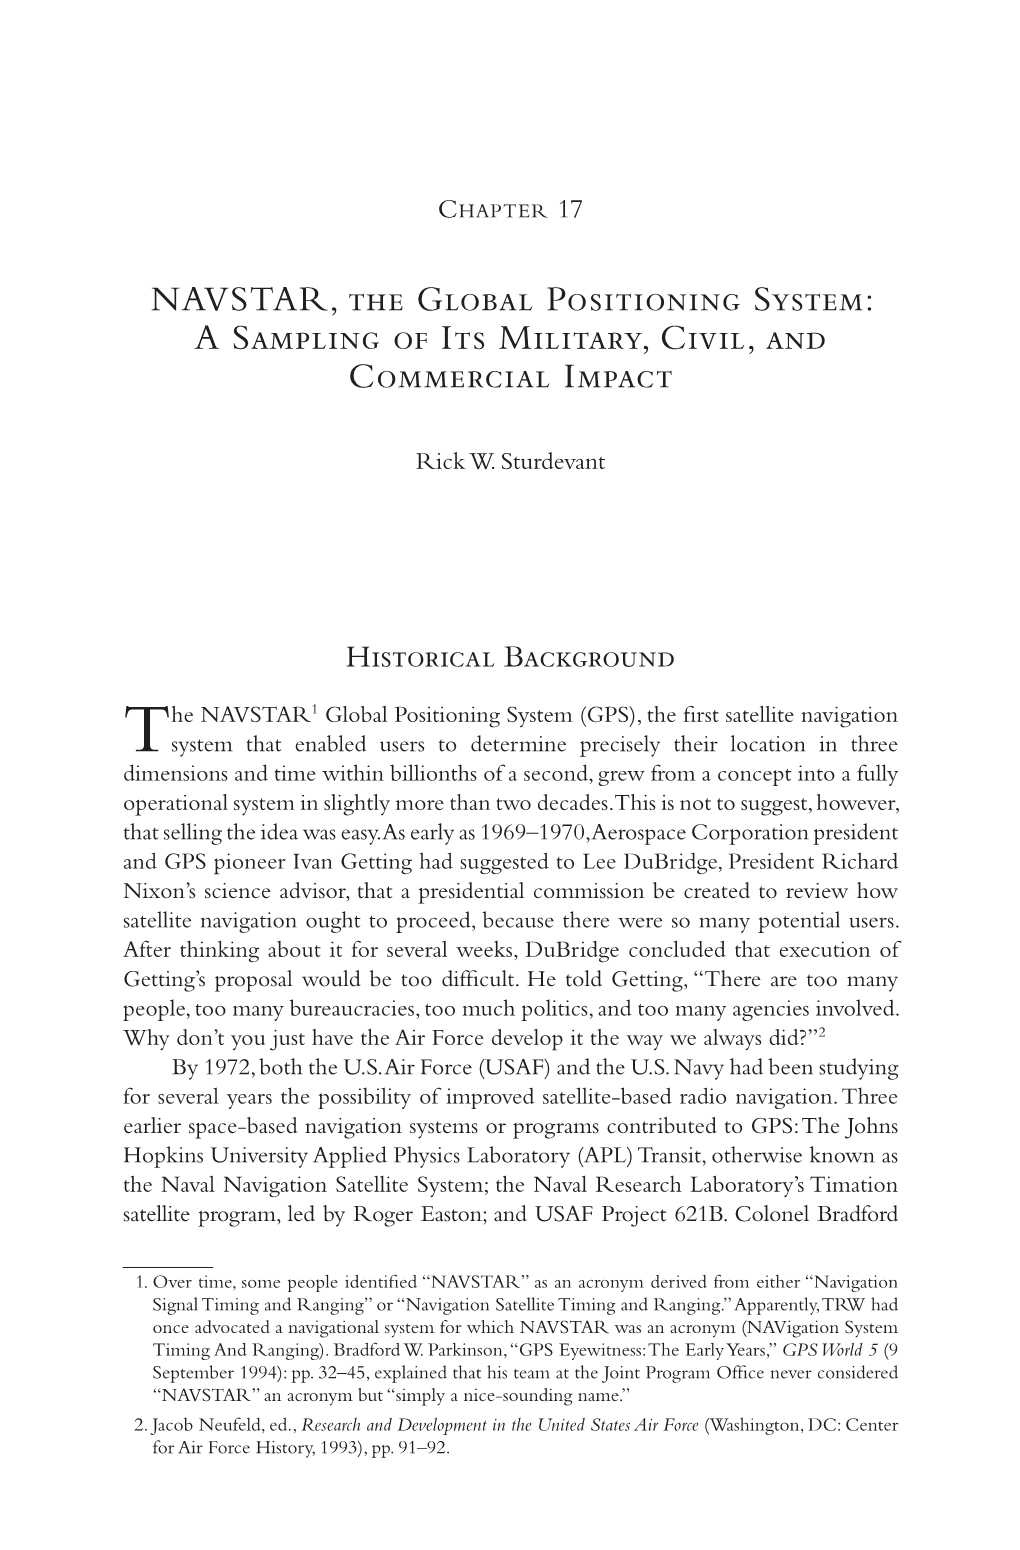 NAVSTAR, the Global Positioning System: a Sampling 331 of Its Military, Civil, and Commercial Impact